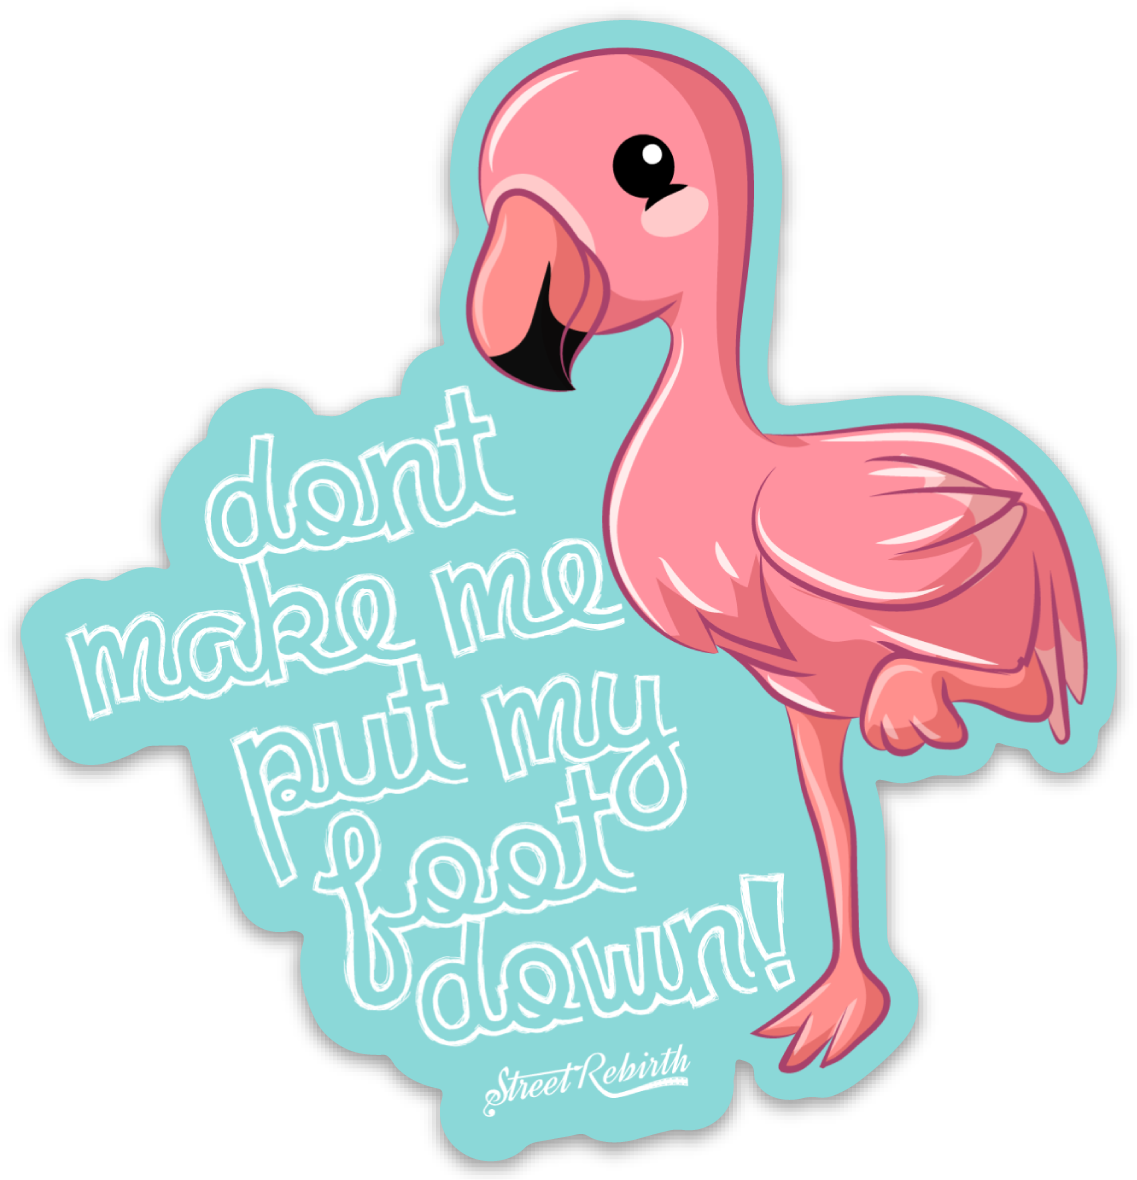 Dont Make Me Put My Foot Down! PUN STICKER – ONE 4 INCH WATER PROOF VINYL STICKER – FOR HYDRO FLASK, SKATEBOARD, LAPTOP, PLANNER, CAR, COLLECTING, GIFTING